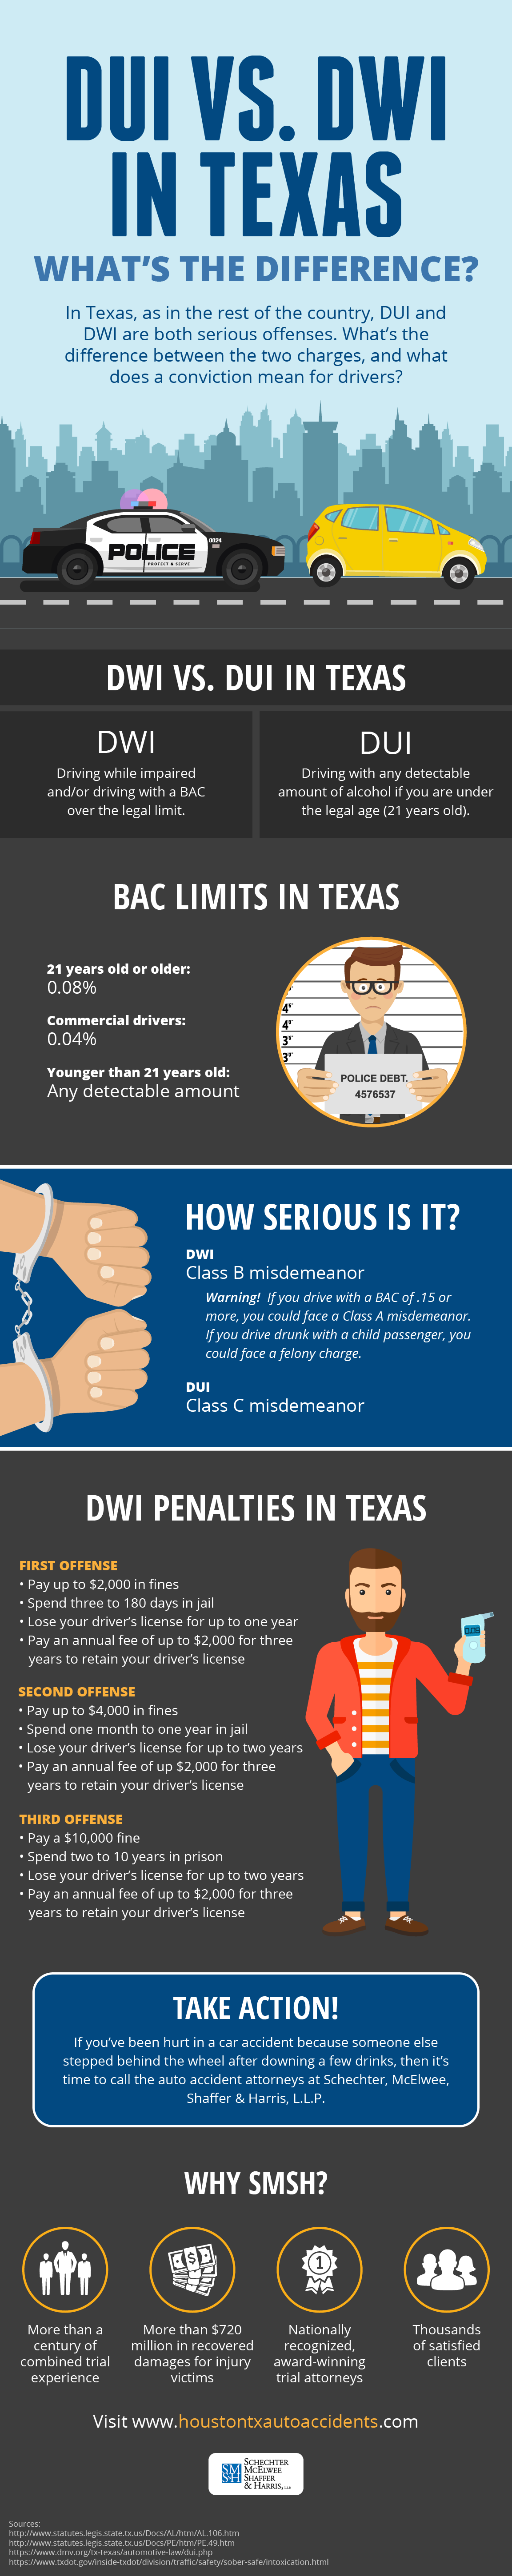 DUI vs. DWI in Texas: What’s the Difference? | Houston Auto Accidents